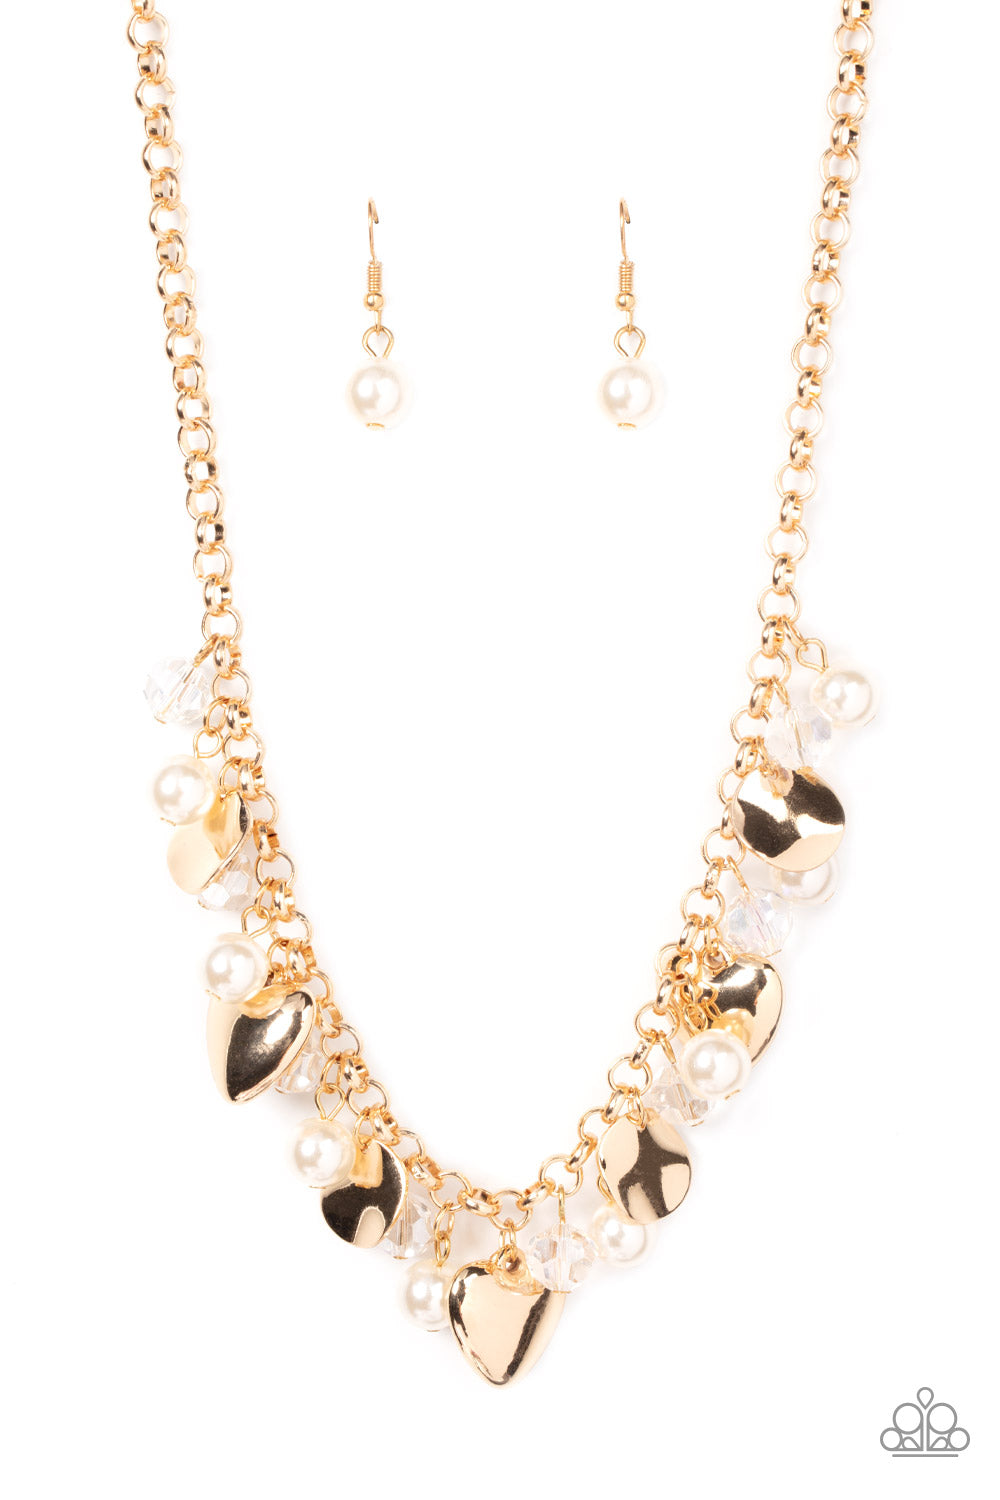 True Loves Trove - Gold Necklace